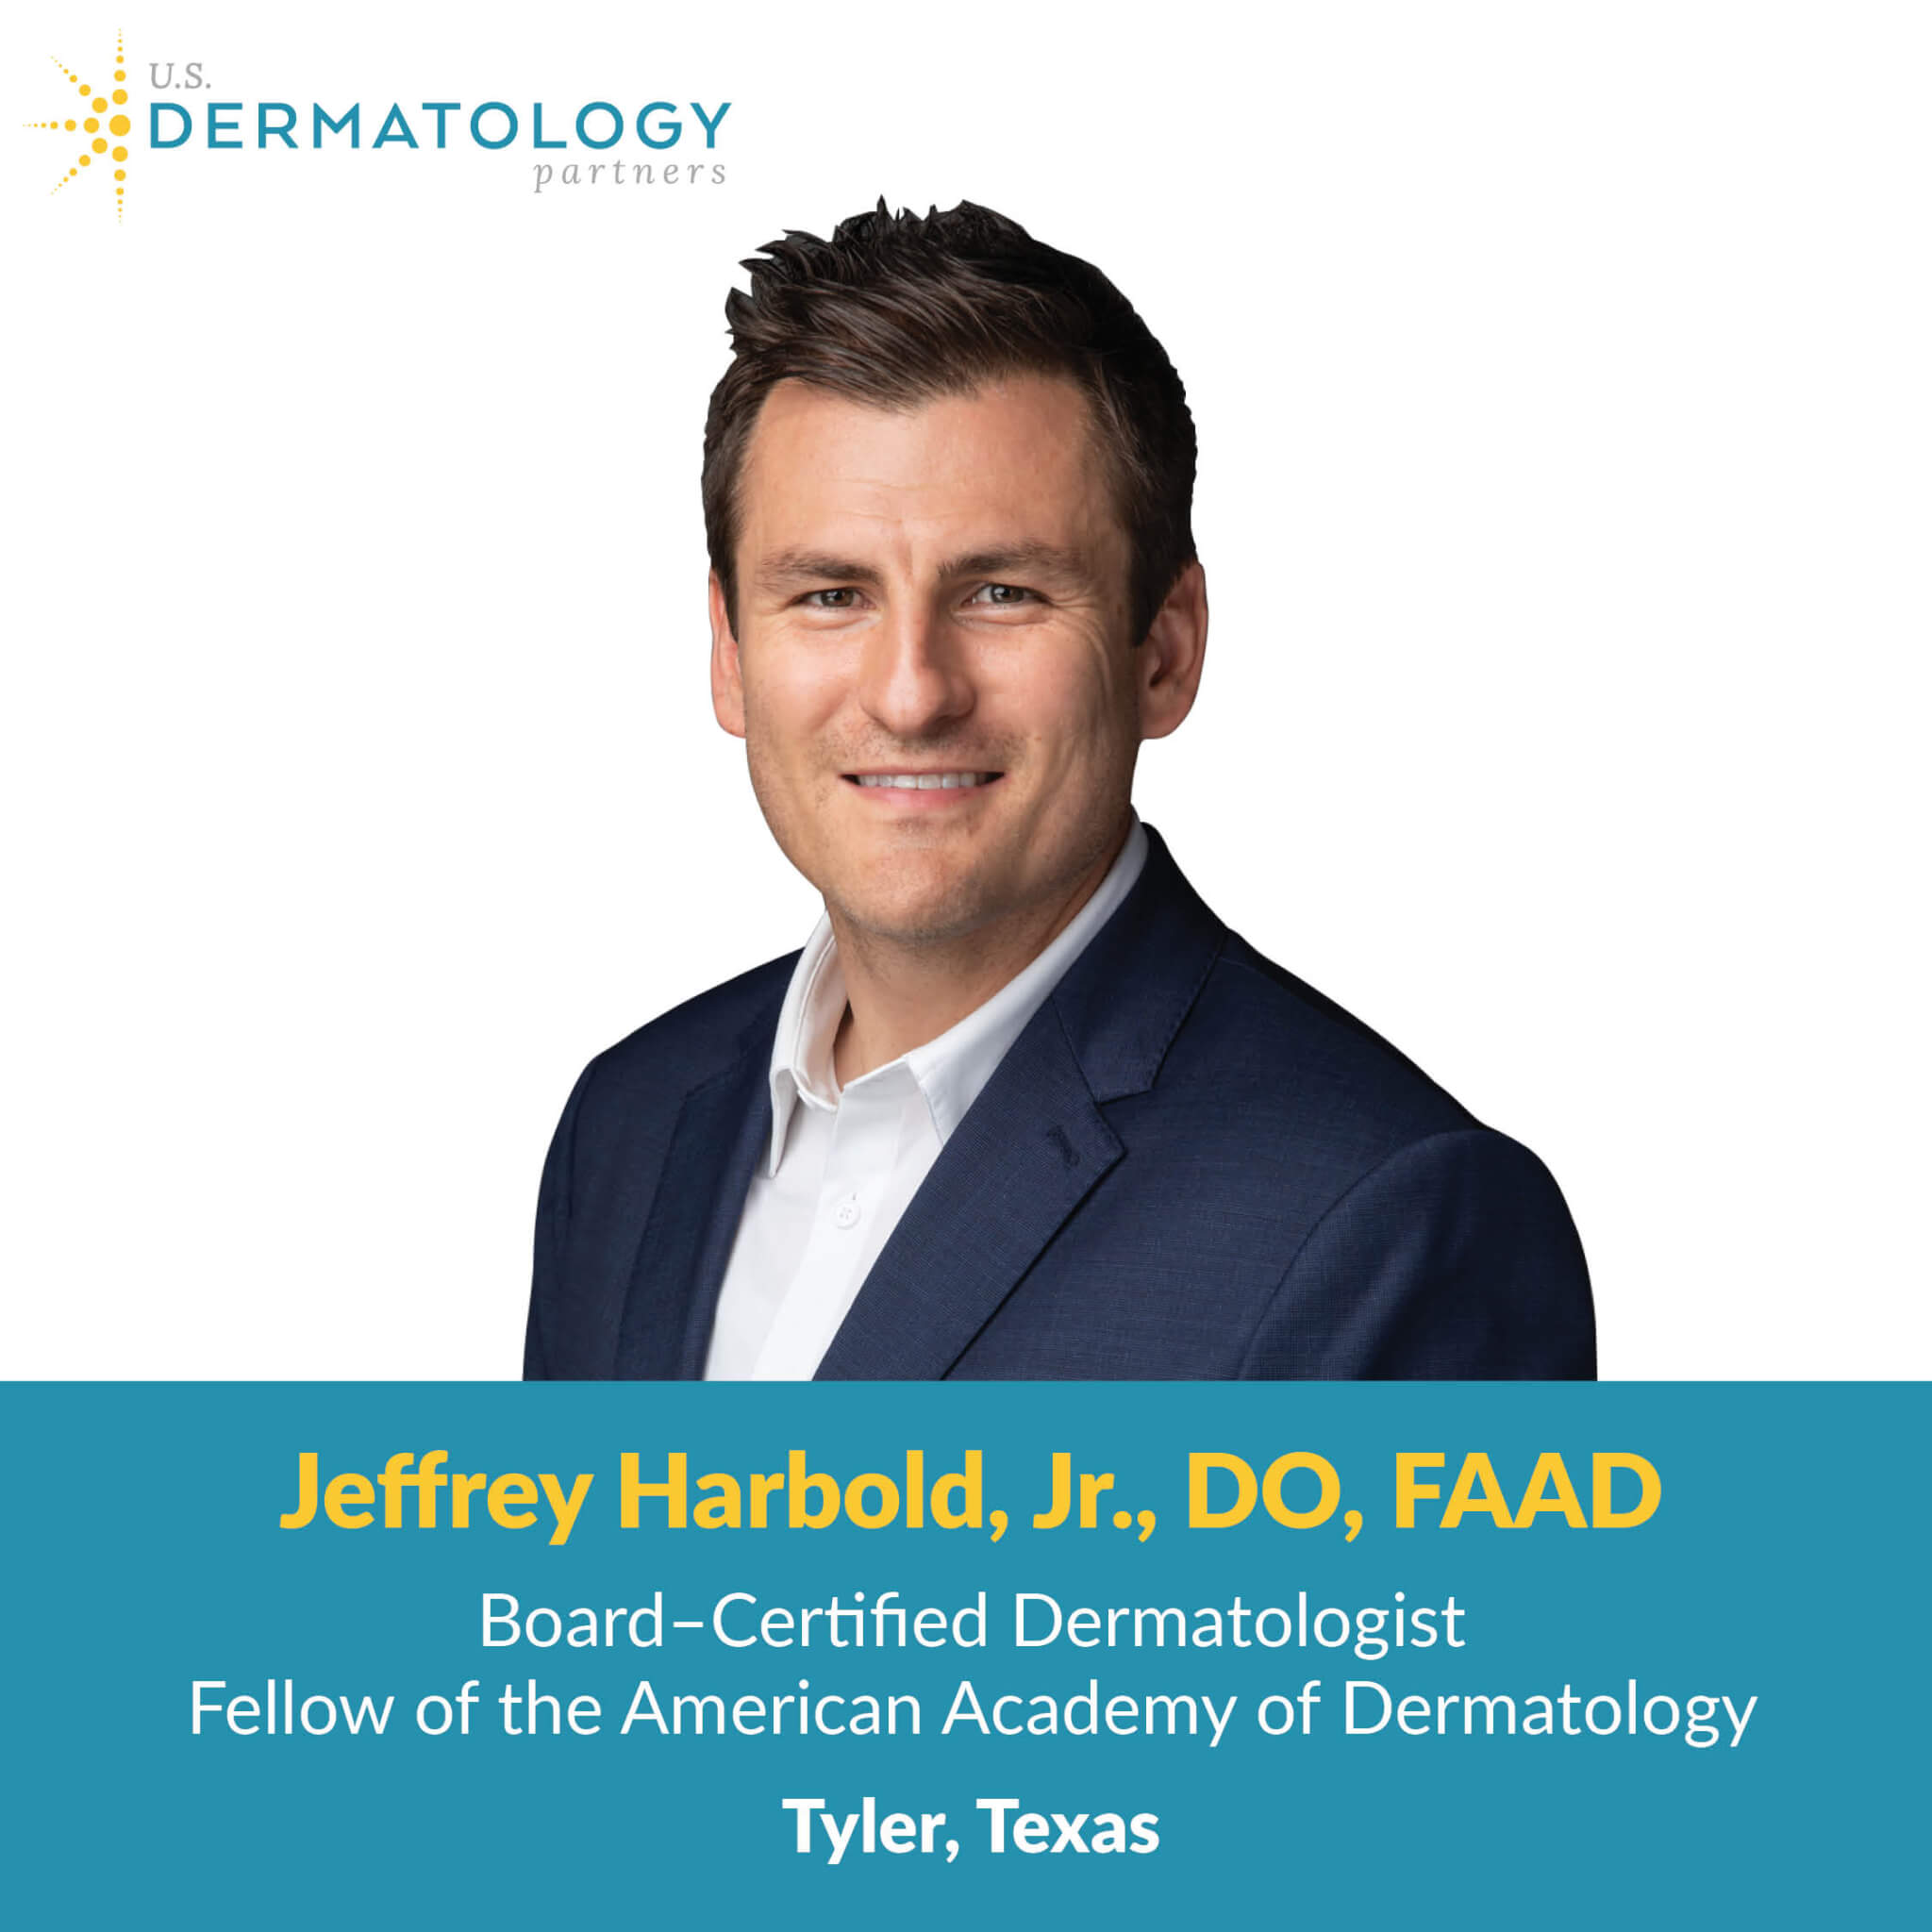 Dr. Jeffrey Harbold is a Board-Certified Dermatologist providing skin care to patients in Tyler, Texas.